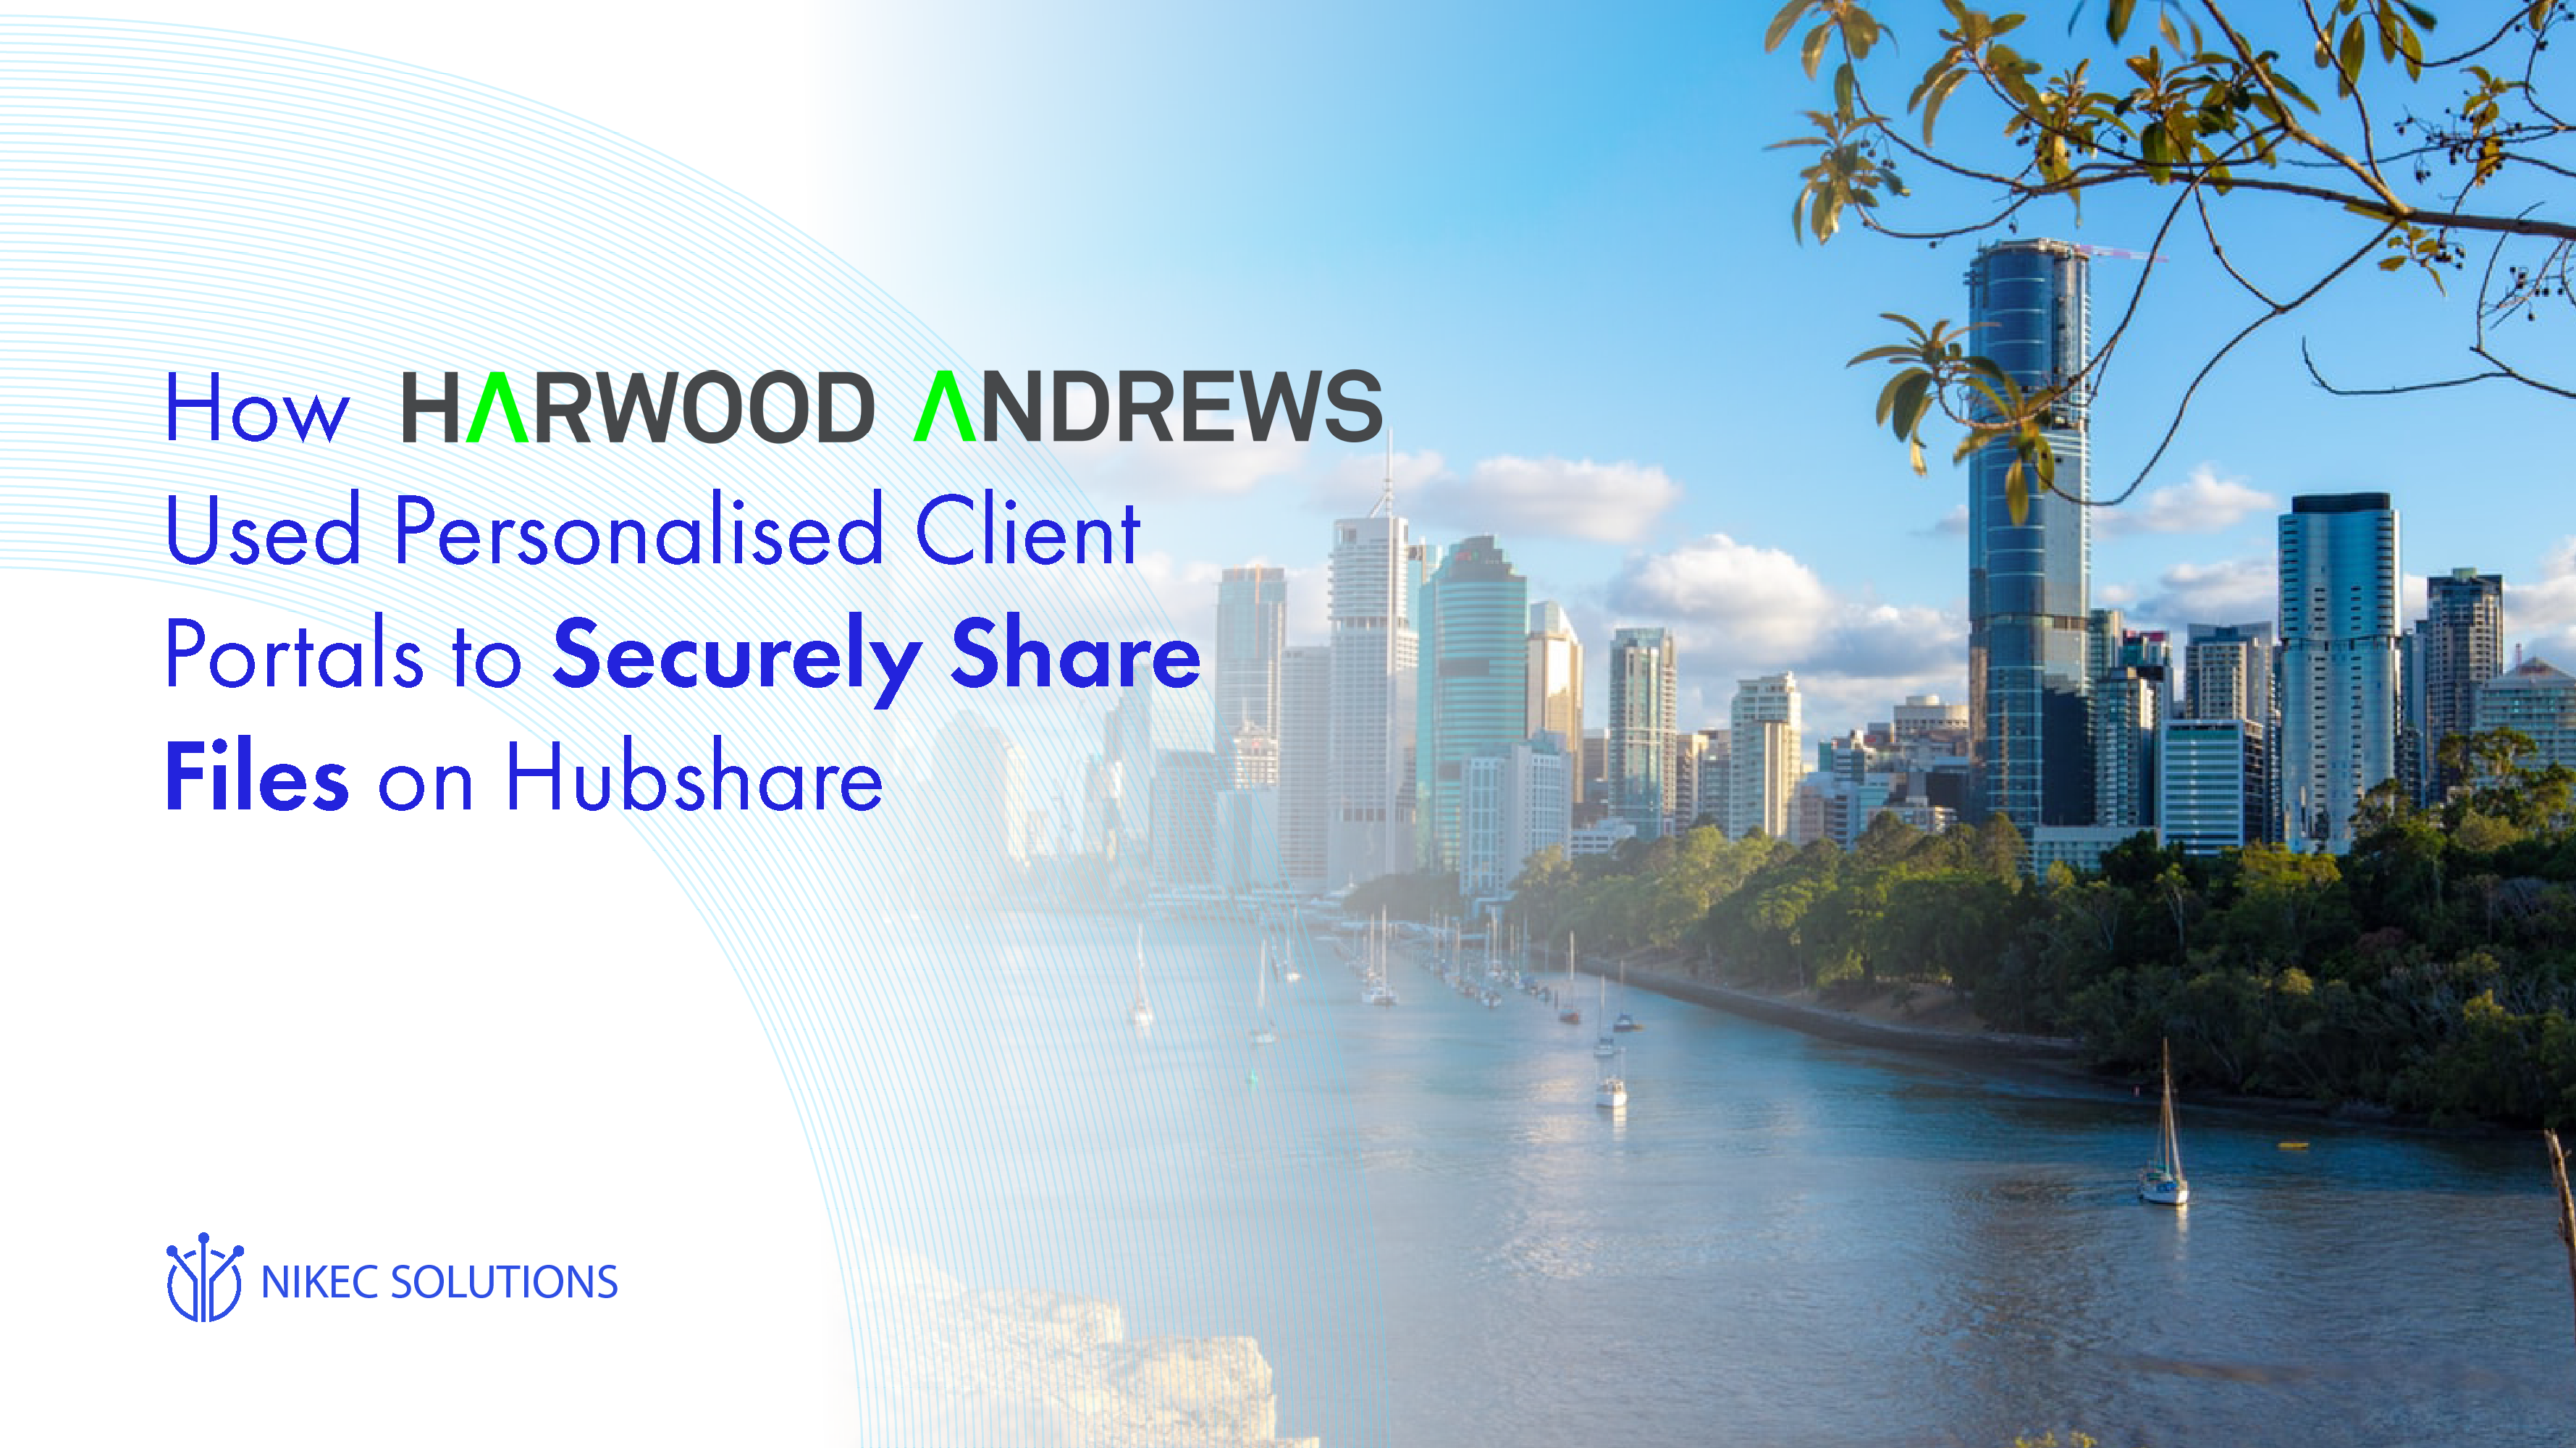 How Harwood Andrews has made use of Hubshare as their client extranet portal & why it works for them and their multi-generational org.